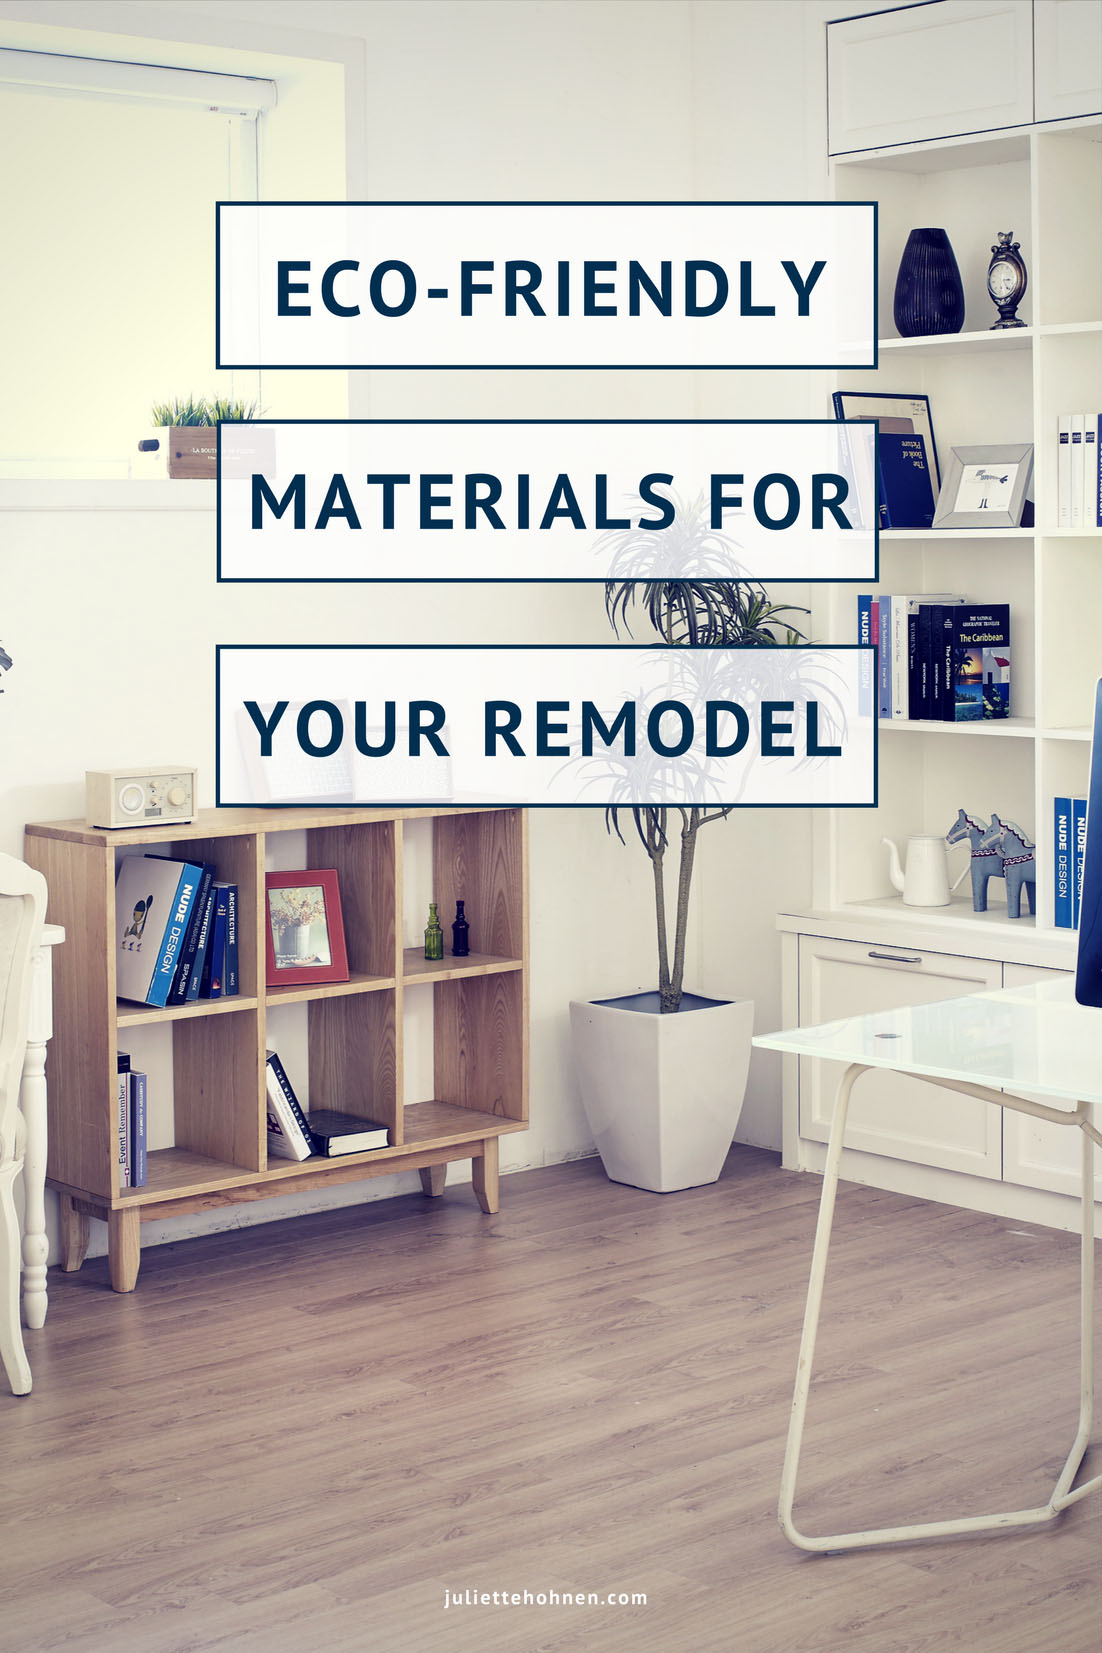 Eco-Friendly Materials when Remodeling